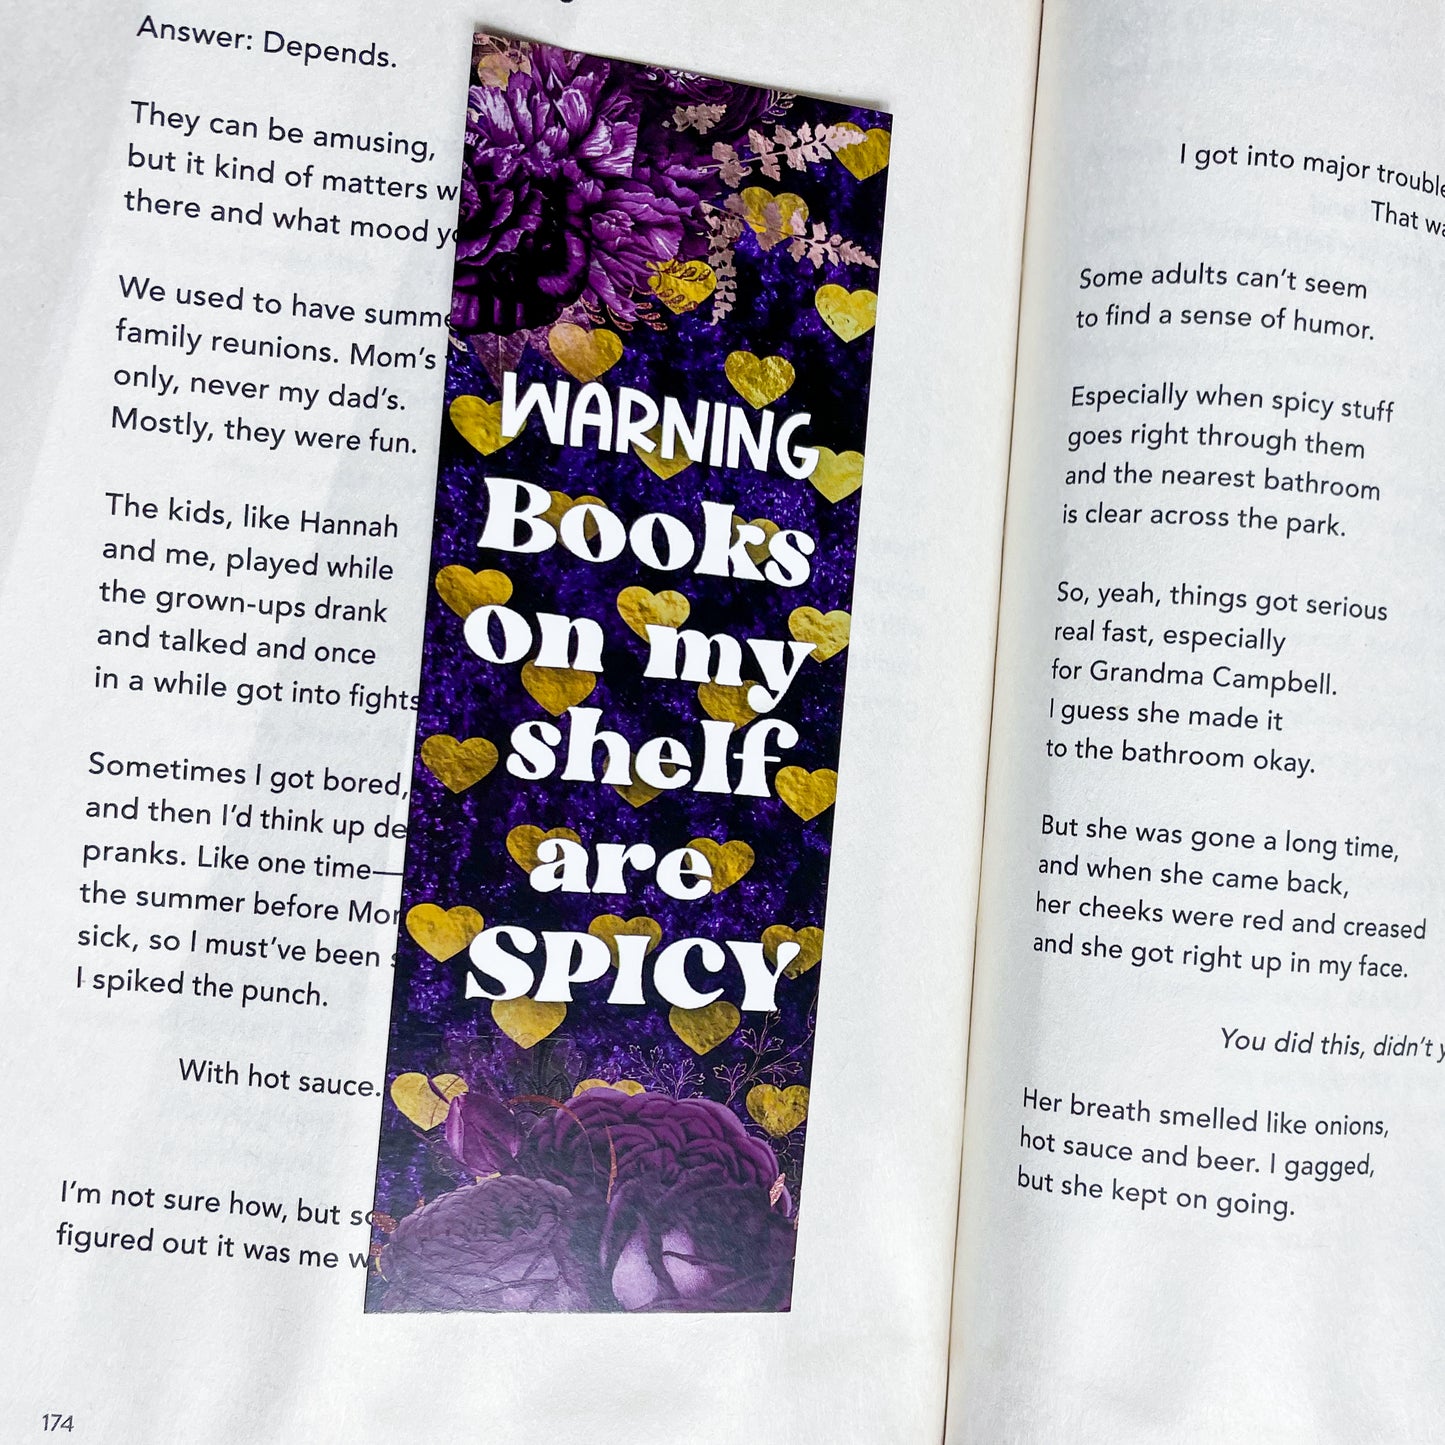 Warning: Books on my Shelf are Spicy Bookmark | Romance Books  | Romance Readers | Funny Bookmarks